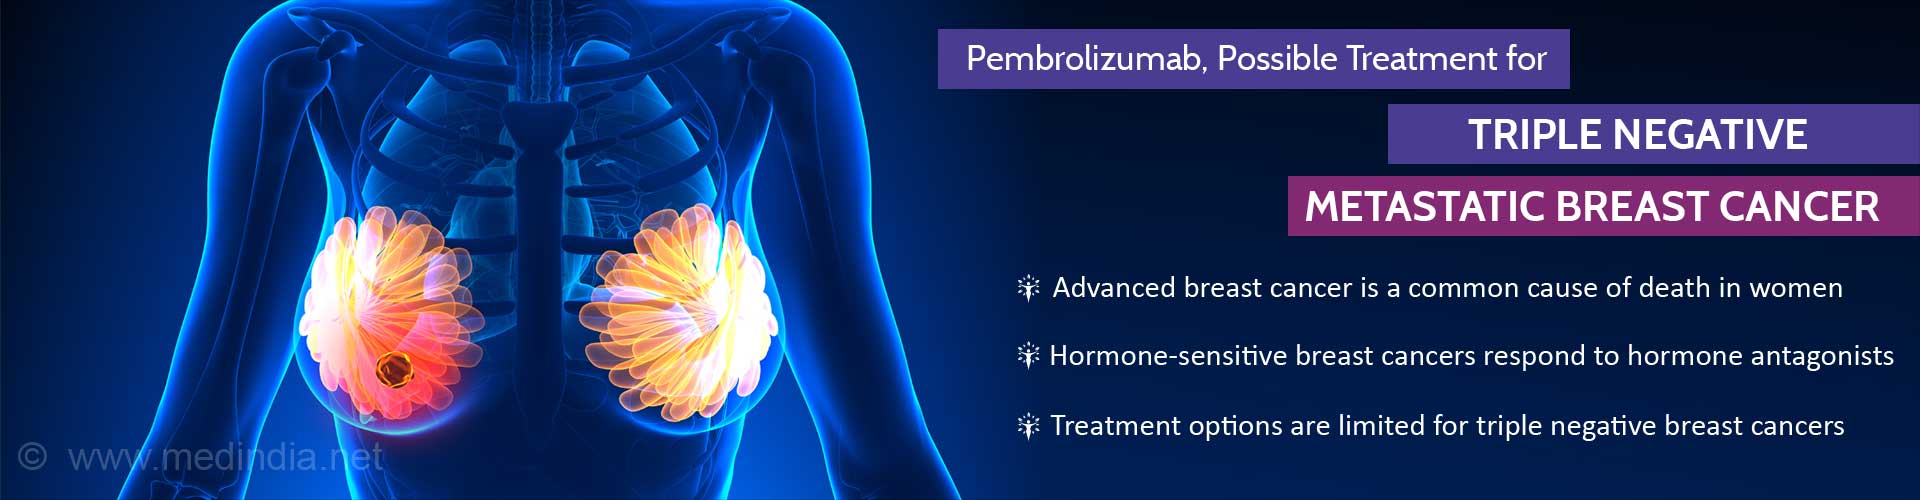 Pembrolizumab, possible treatment for triple negative metastatic breast cancer
- Advanced breast cancer is a common cause of death in women
- Hormone-sensitive breast cancers respond to hormone antagonists
- Treatment options are limited for triple negative breast cancers